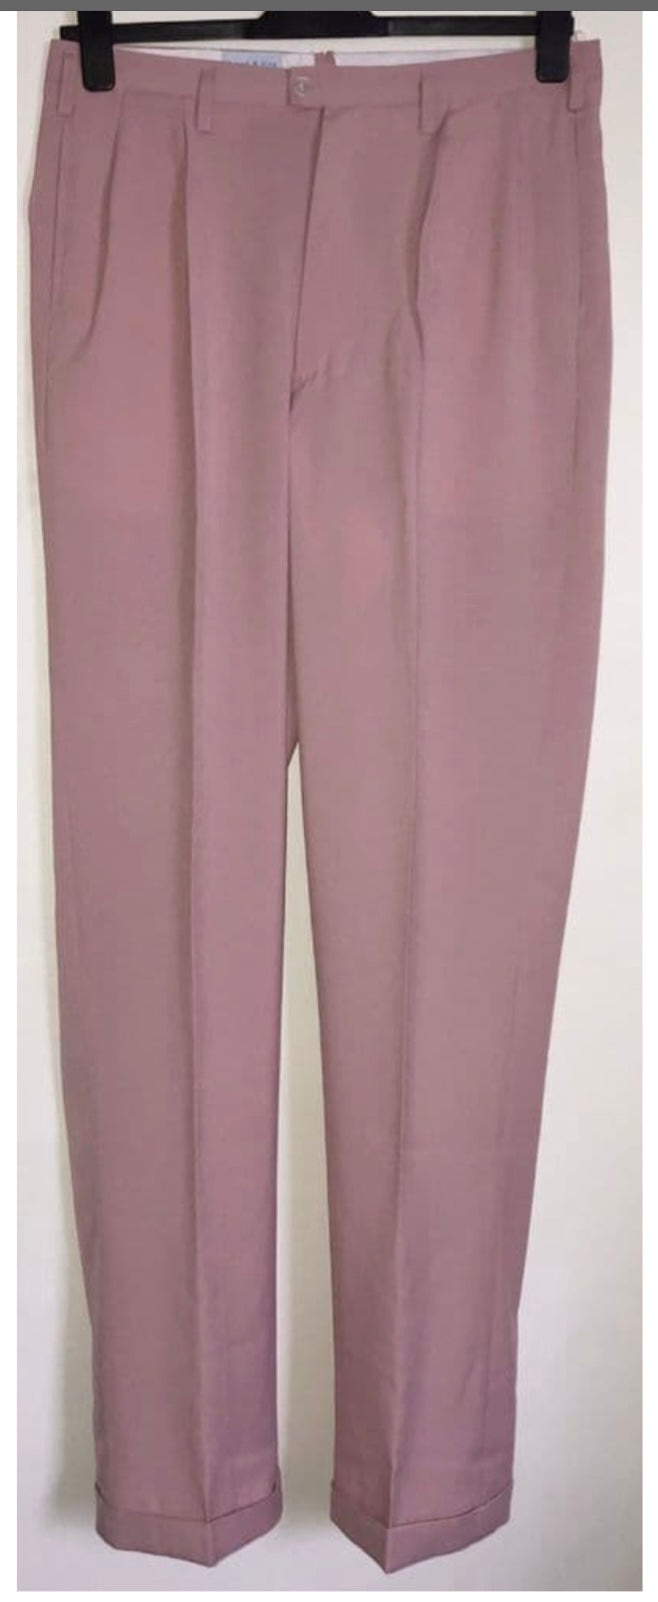 Men’s vintage 1950s style pink Hollywood pleat front pants